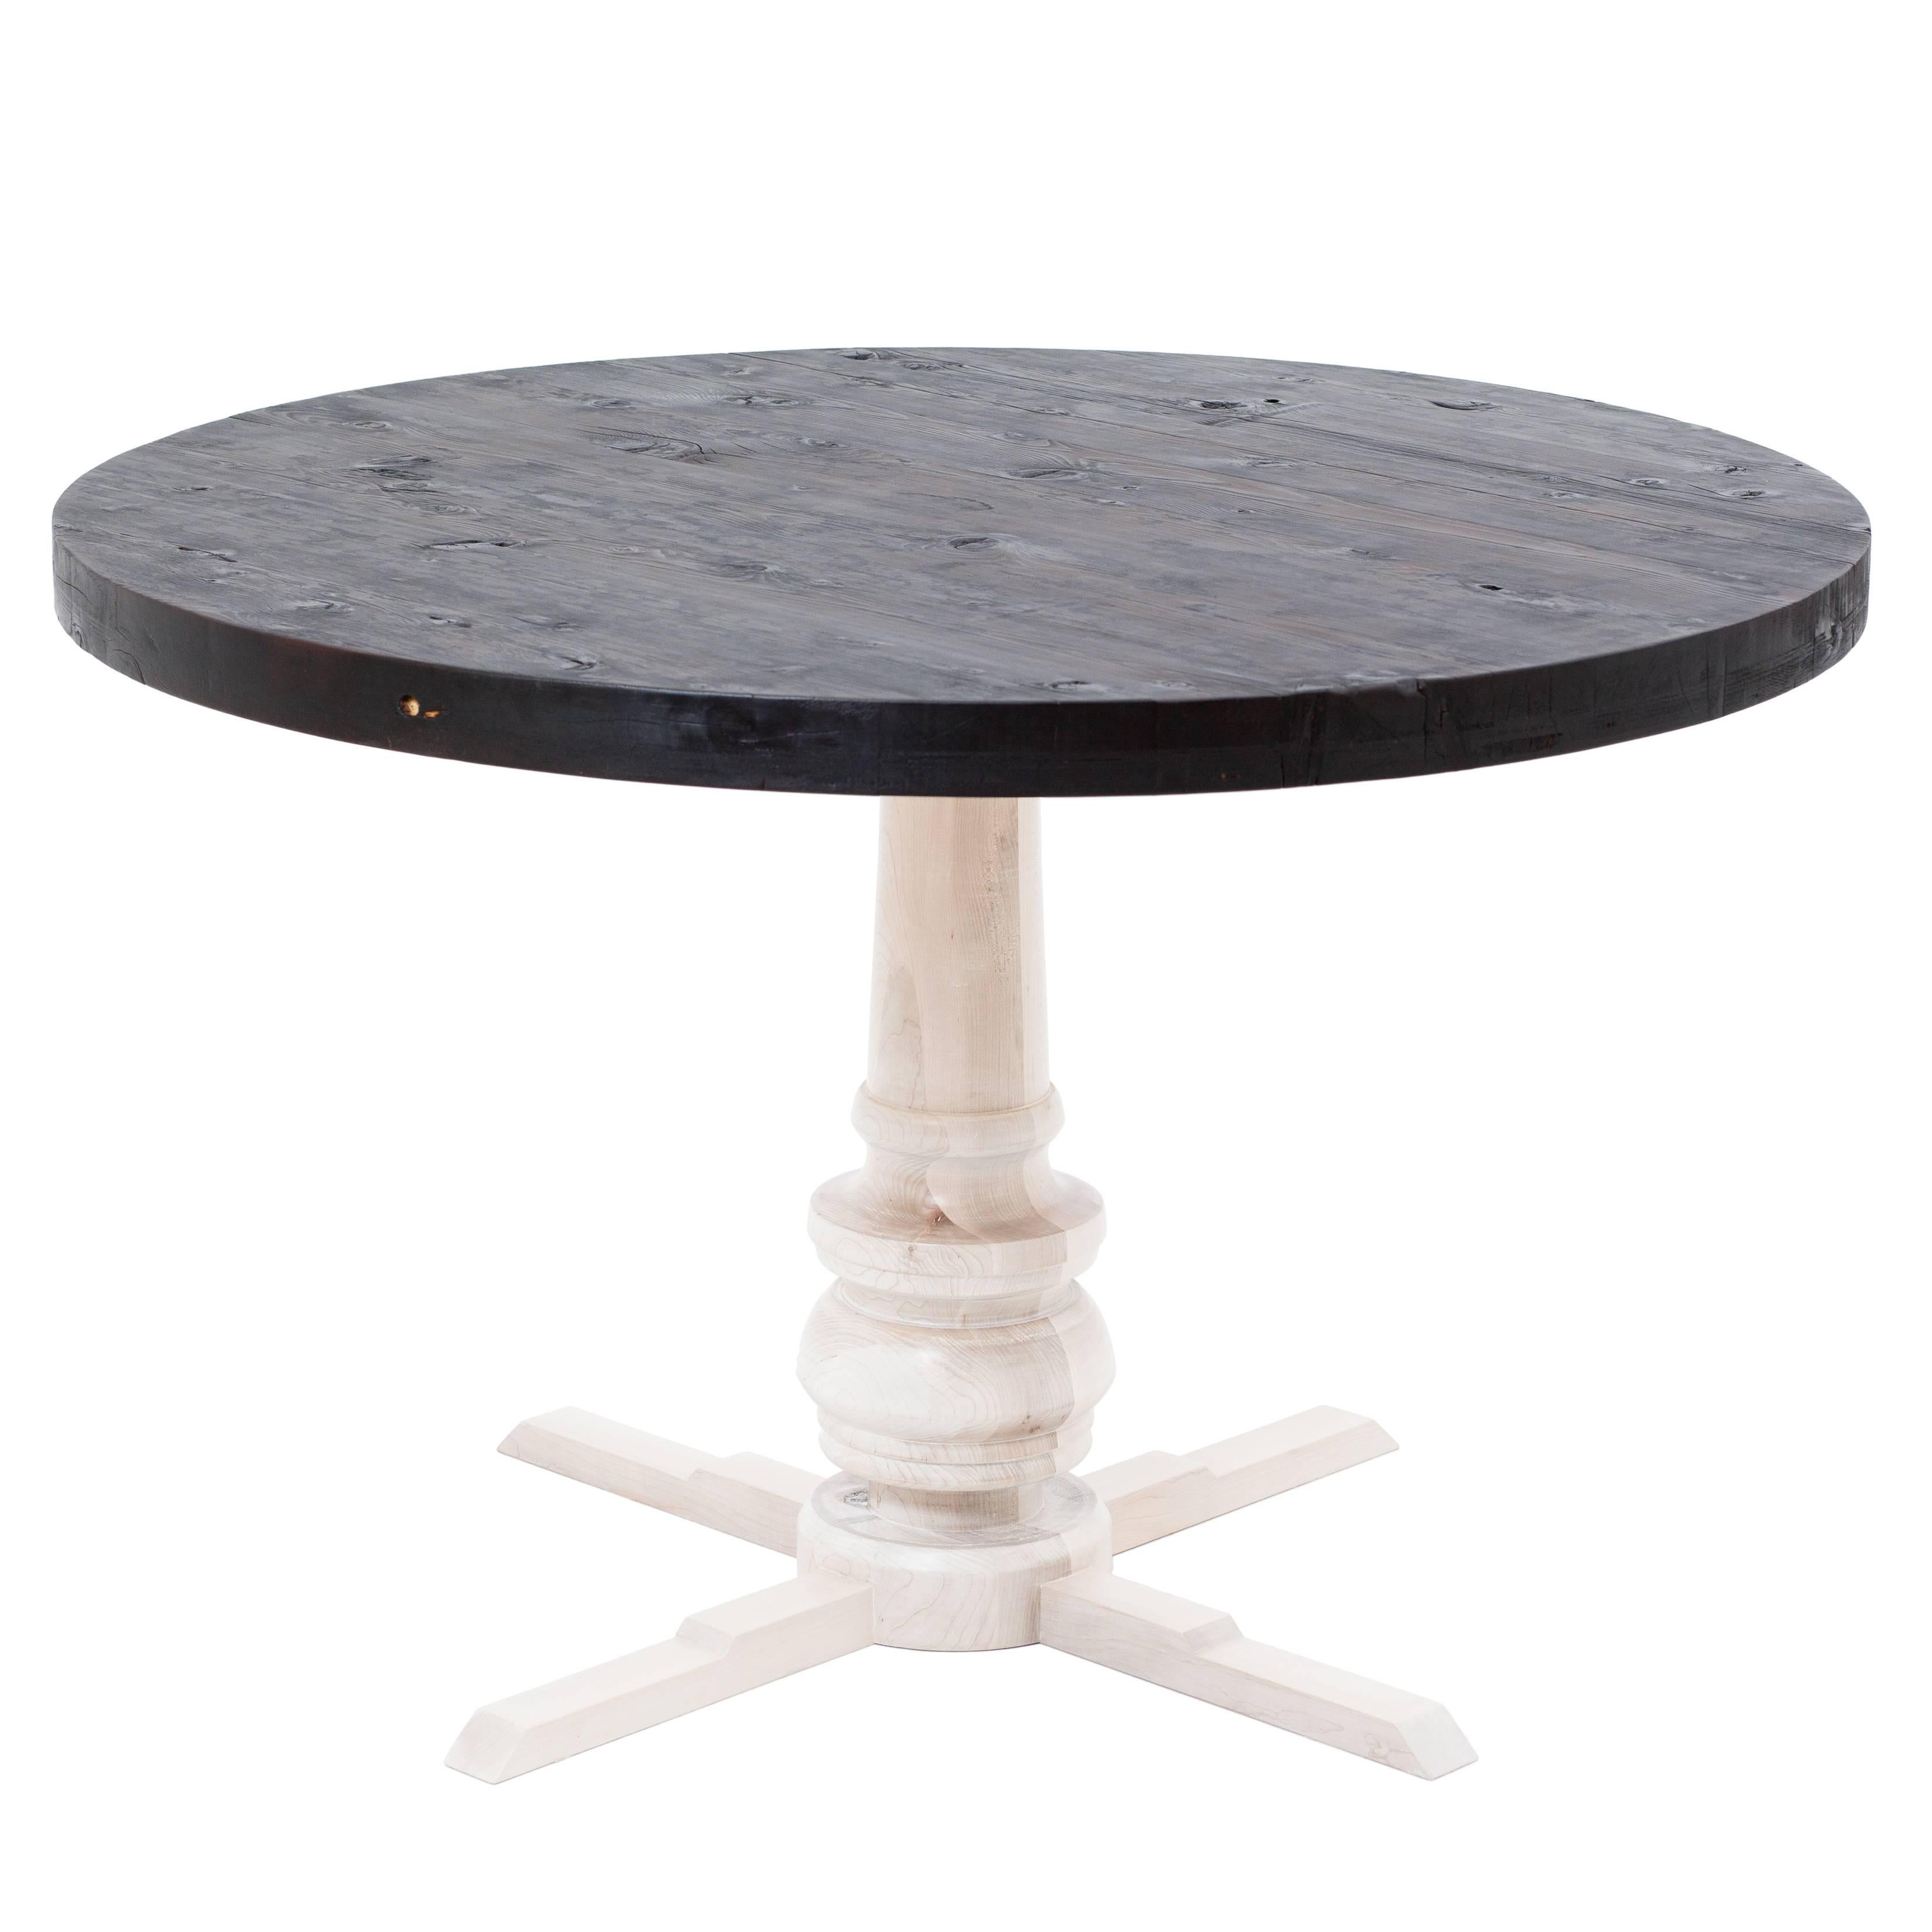 This modern interpretation of the Classic saloon table features a reclaimed water tower top that is torched and then sealed with oil. The hand-turned maple base is pickled white for a striking contrast.

This is a bespoke piece, custom dimensions,